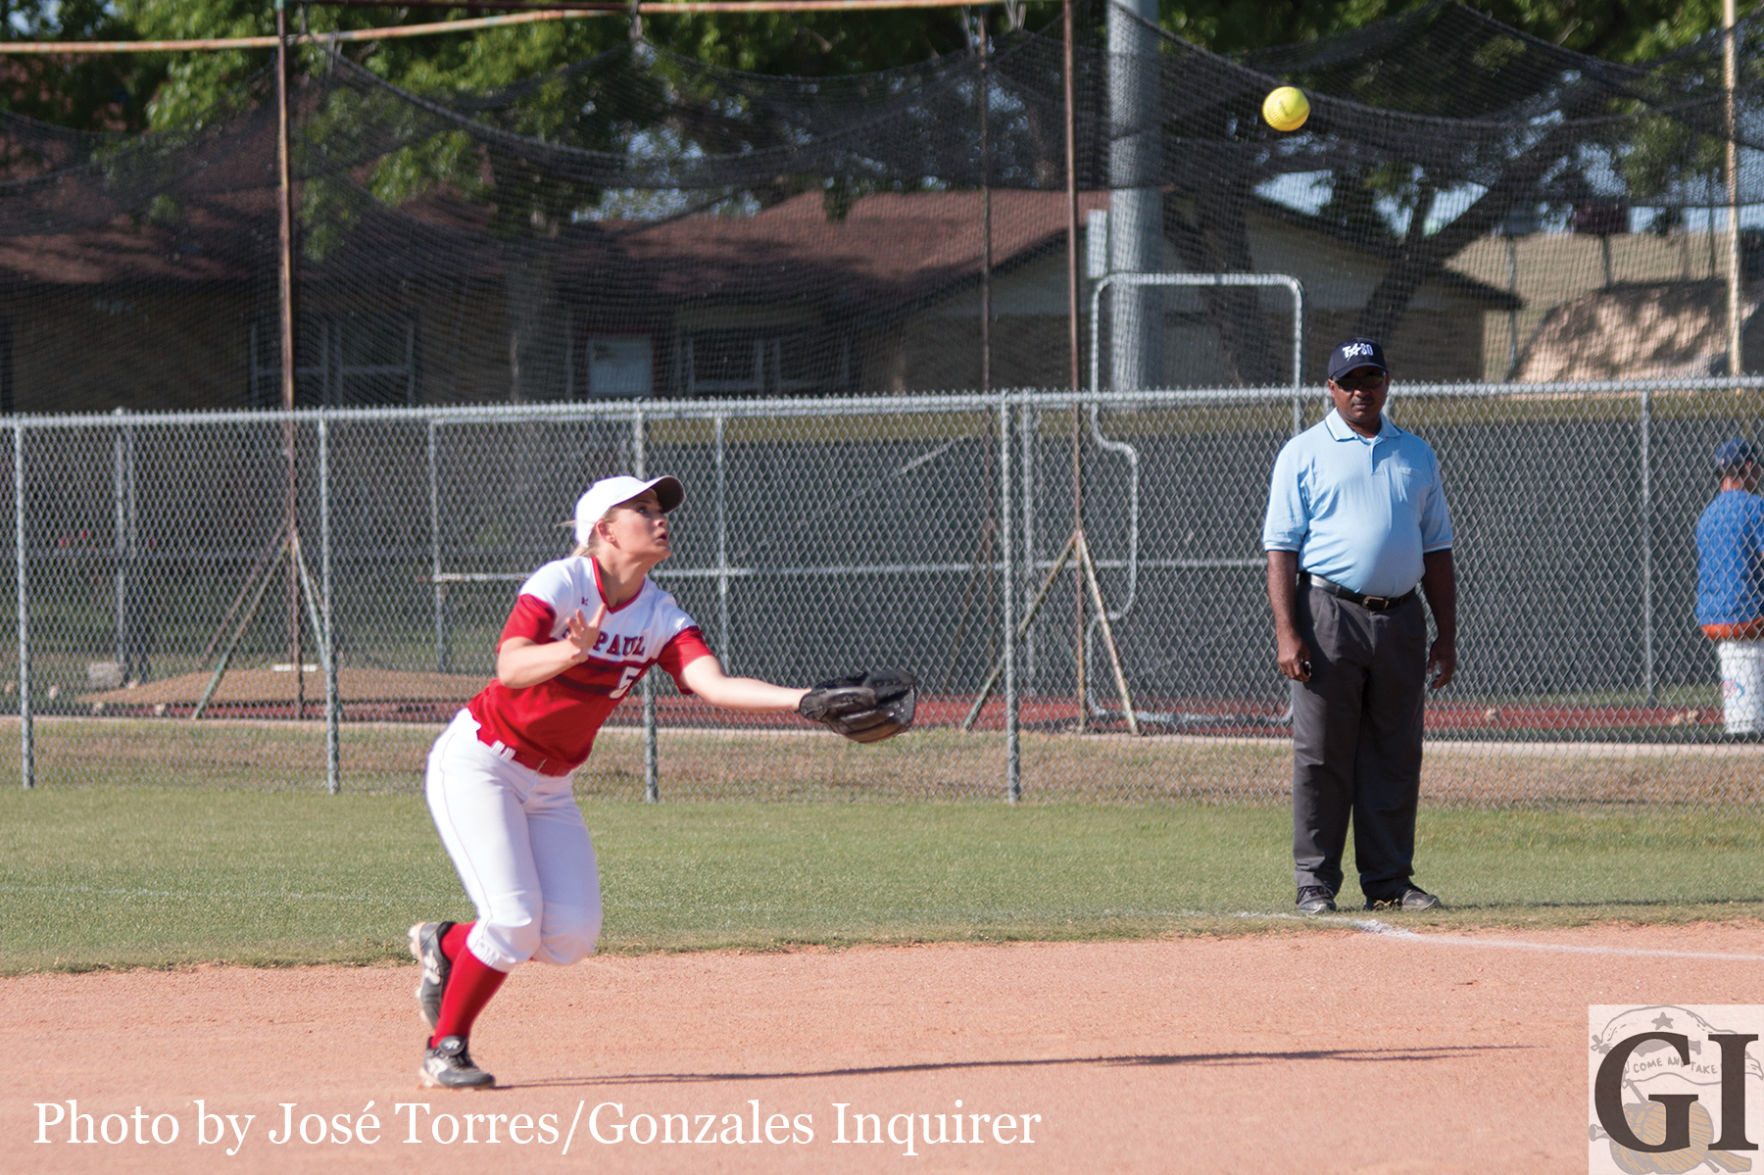 Anna Adamek (5) makes a diving catch in between first and second base.  